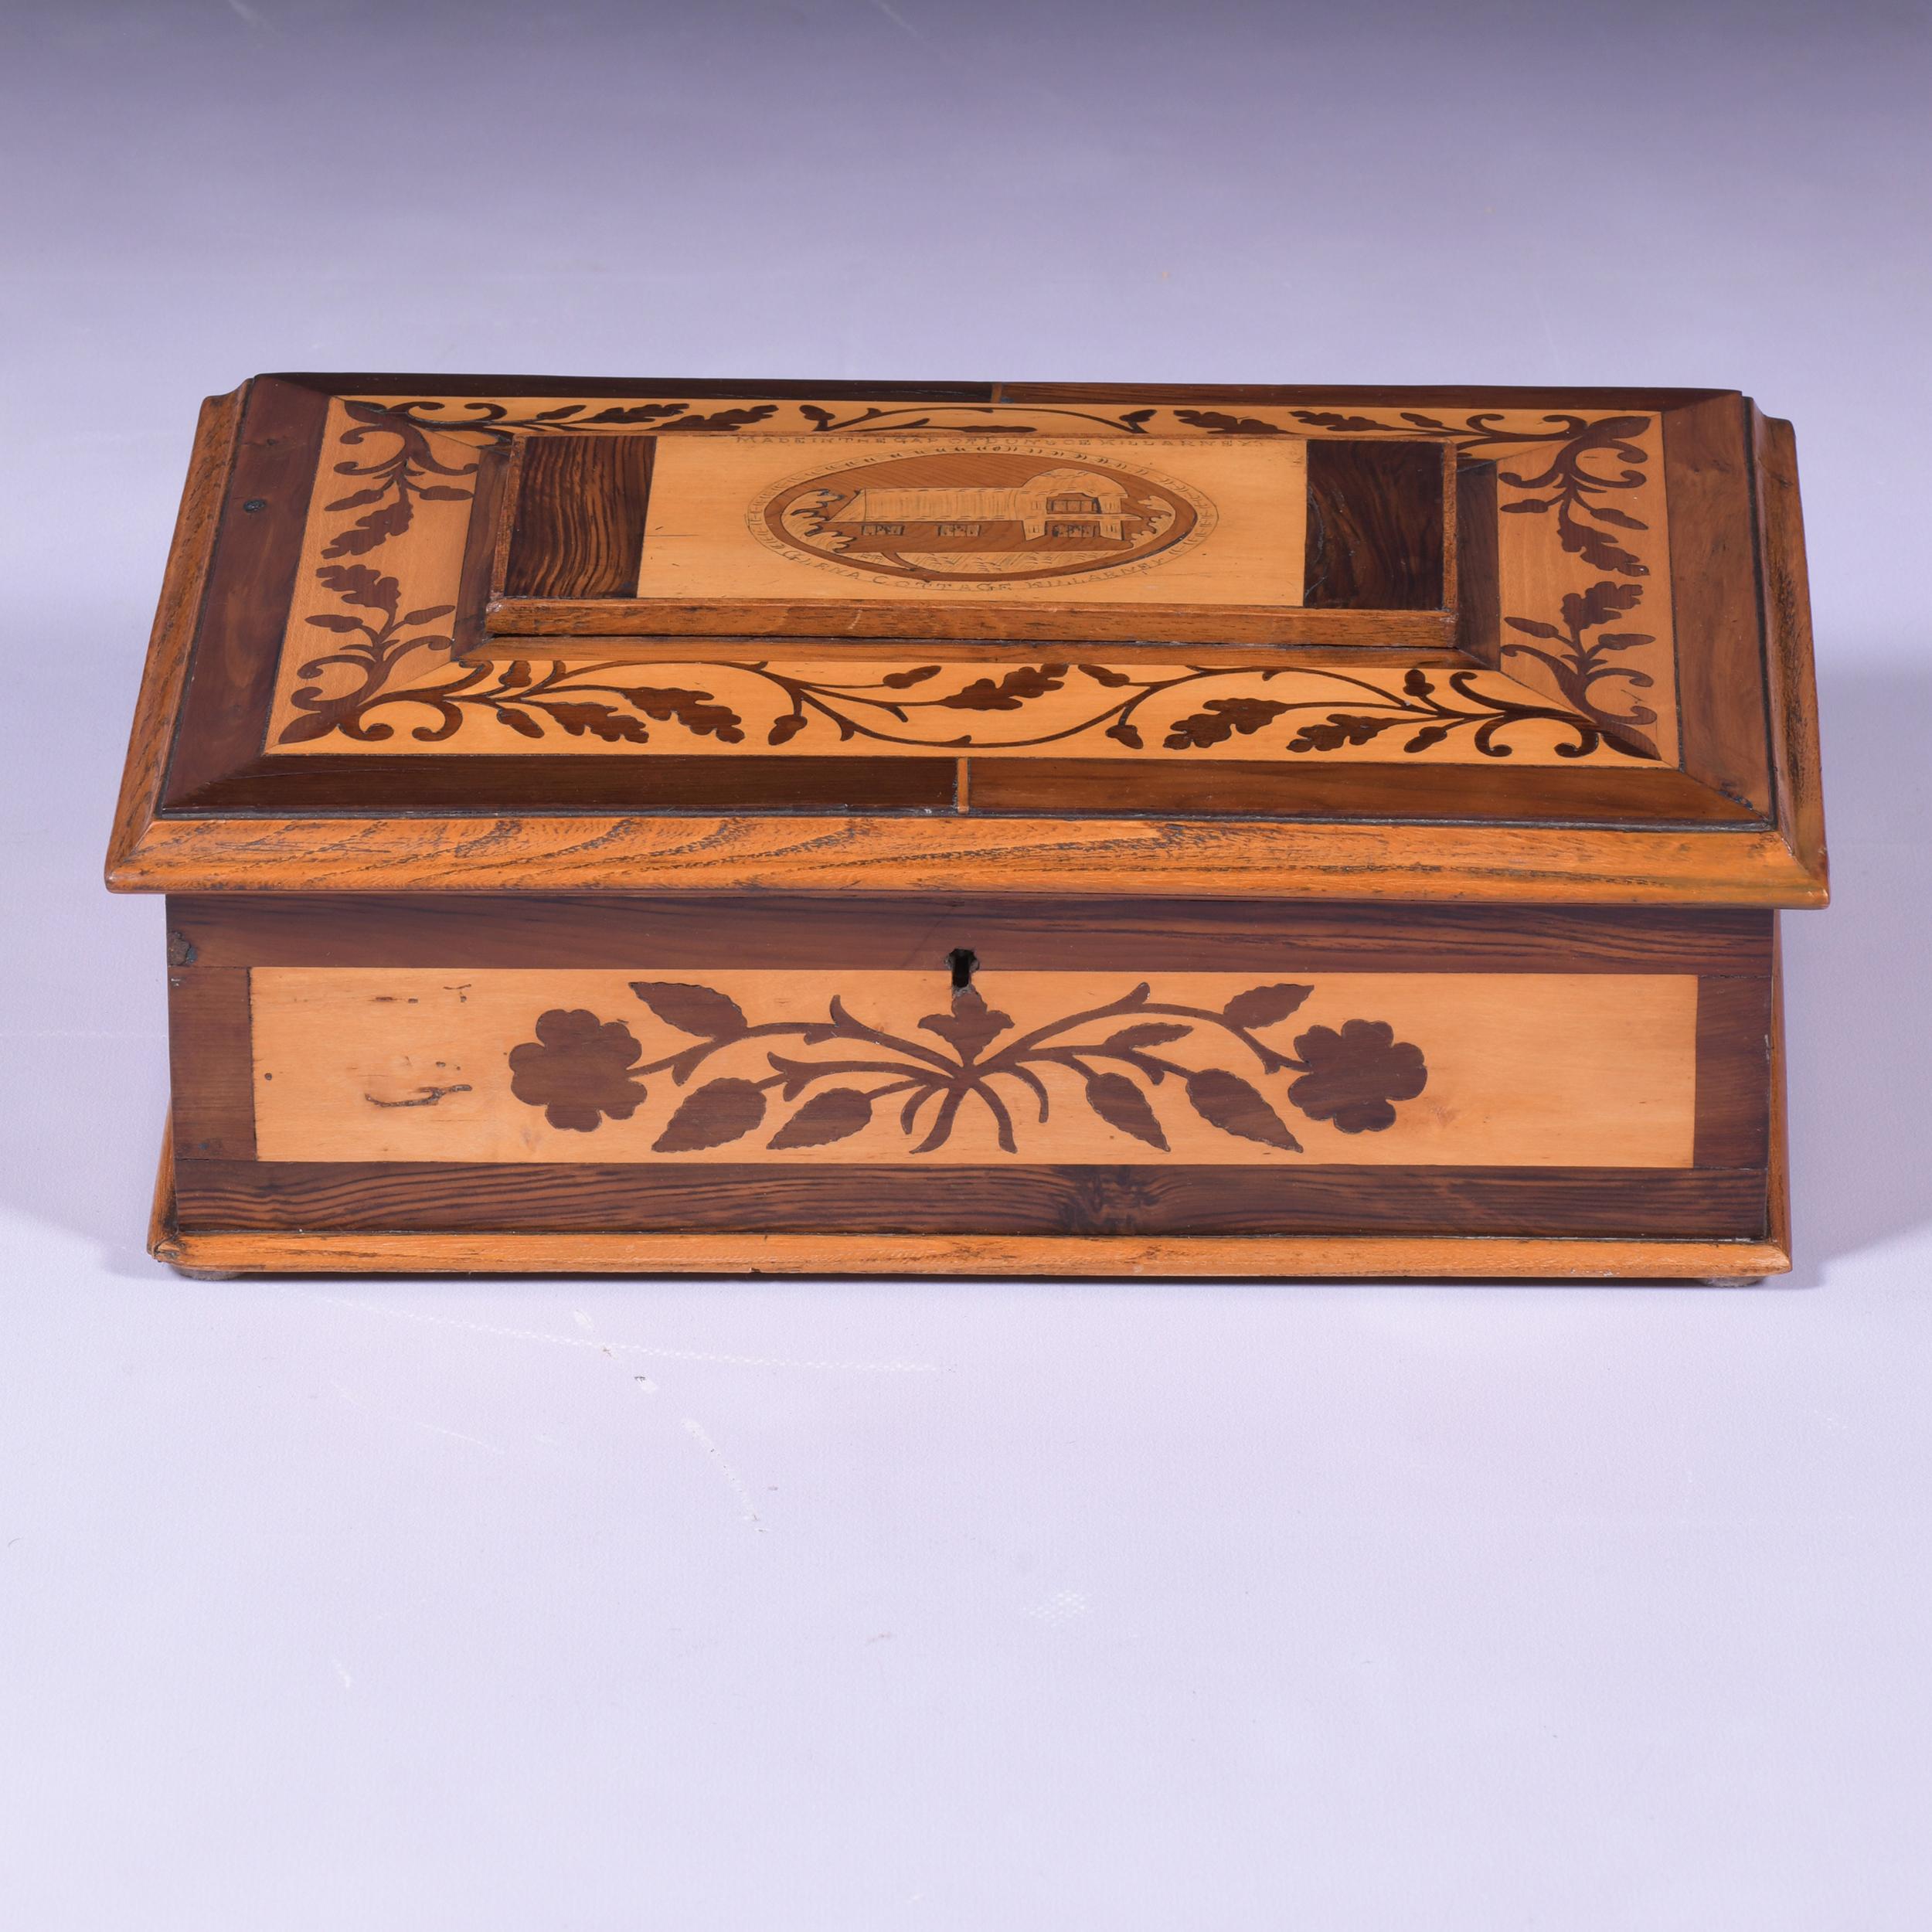 A stunning early 19th century Irish Killarney ware arbutus wood work box, the hinged cover typically inlaid with a scene of Glena Cottage (Killarney) and meandering shamrocks, Inscribed 